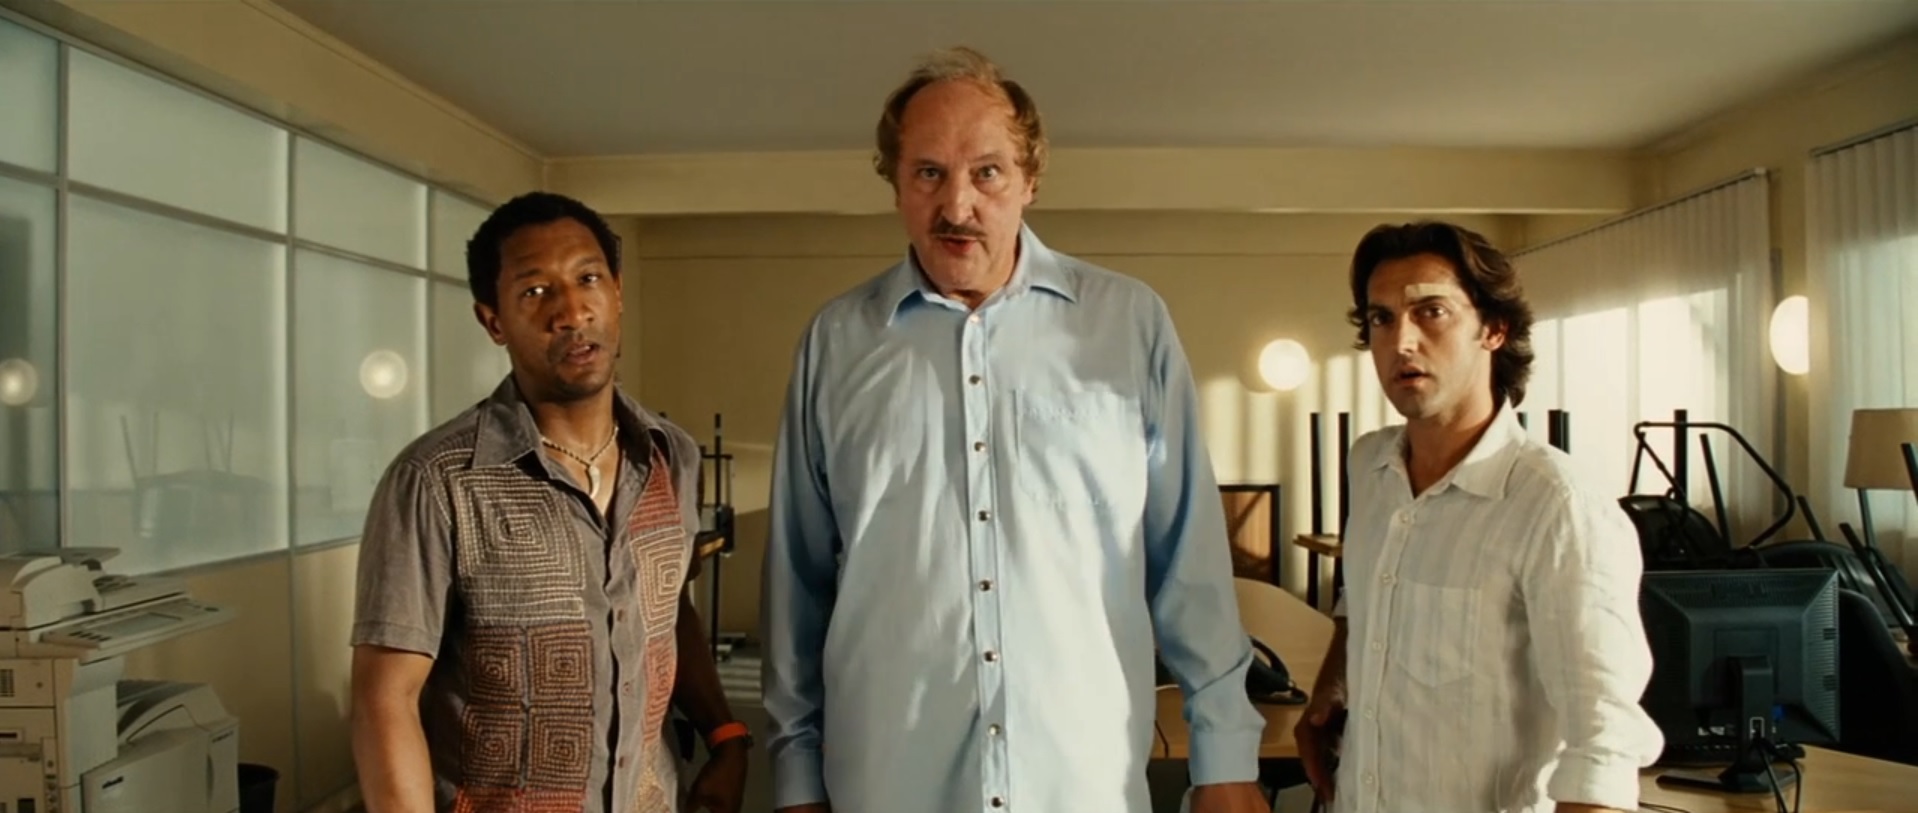 Frédéric Diefenthal, Bernard Farcy, and Edouard Montoute in Taxi 4 (2007)